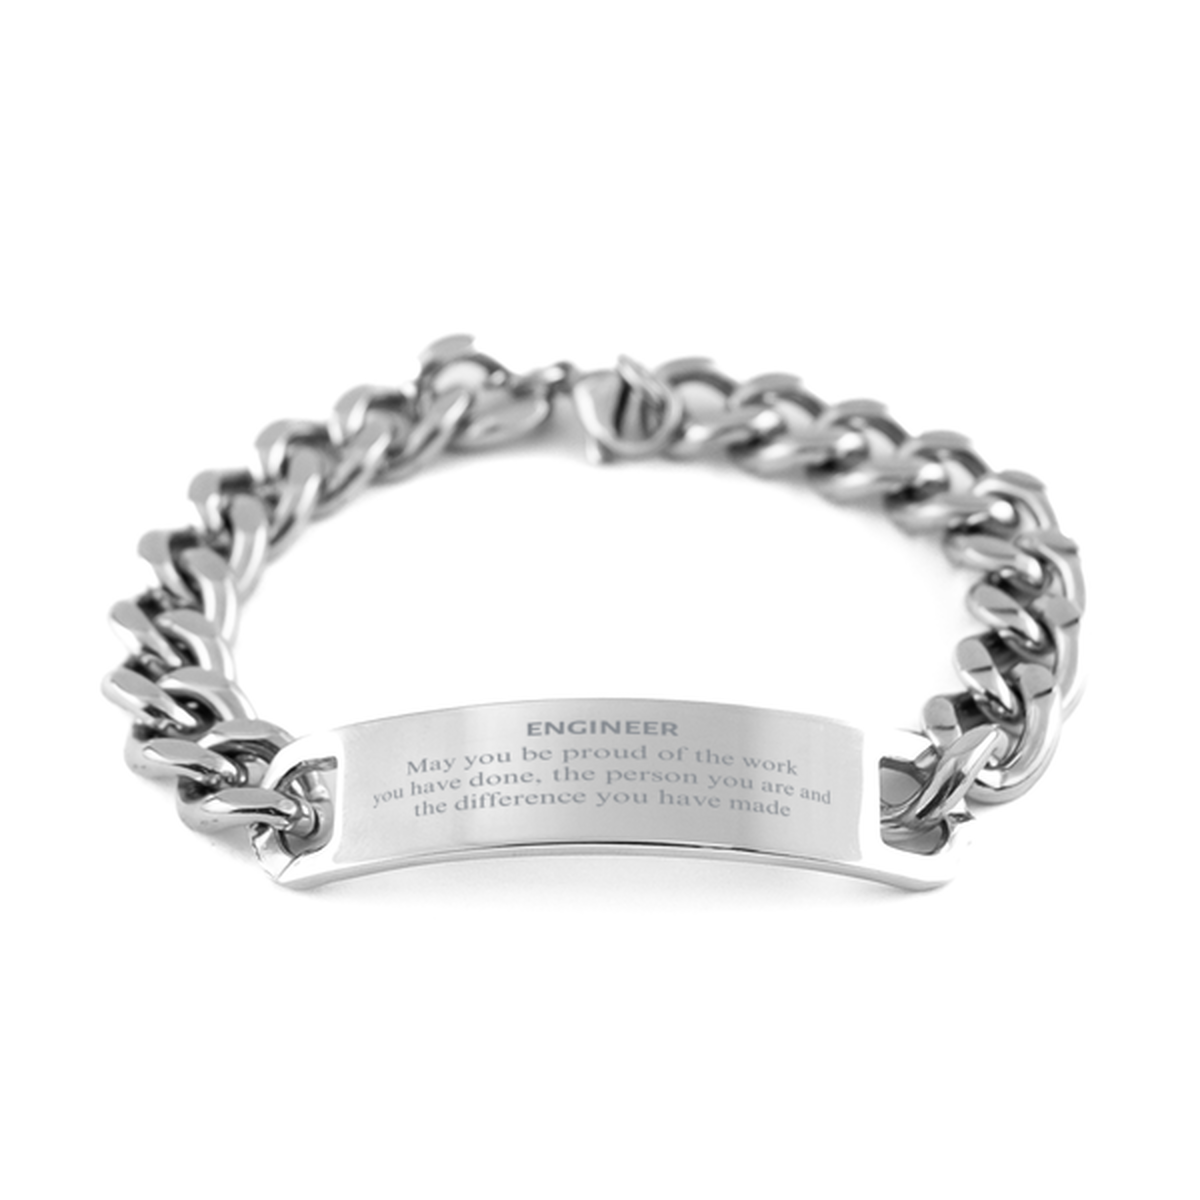 Engineer May you be proud of the work you have done, Retirement Engineer Cuban Chain Stainless Steel Bracelet for Colleague Appreciation Gifts Amazing for Engineer